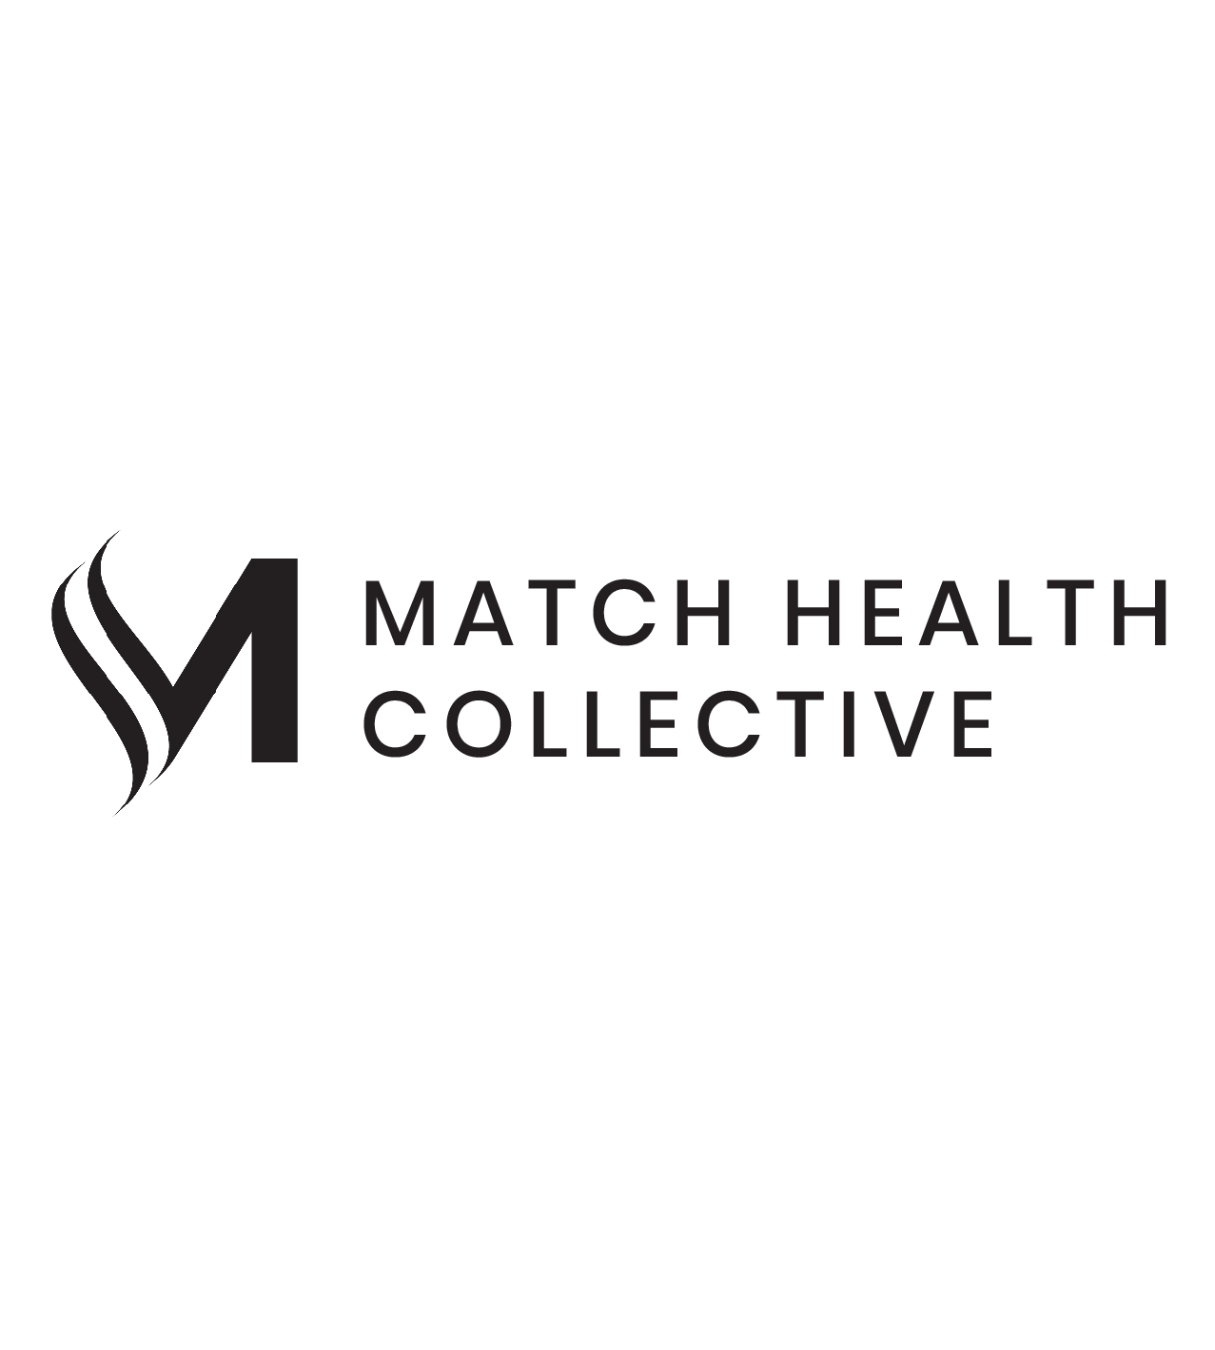 Match Health Collective